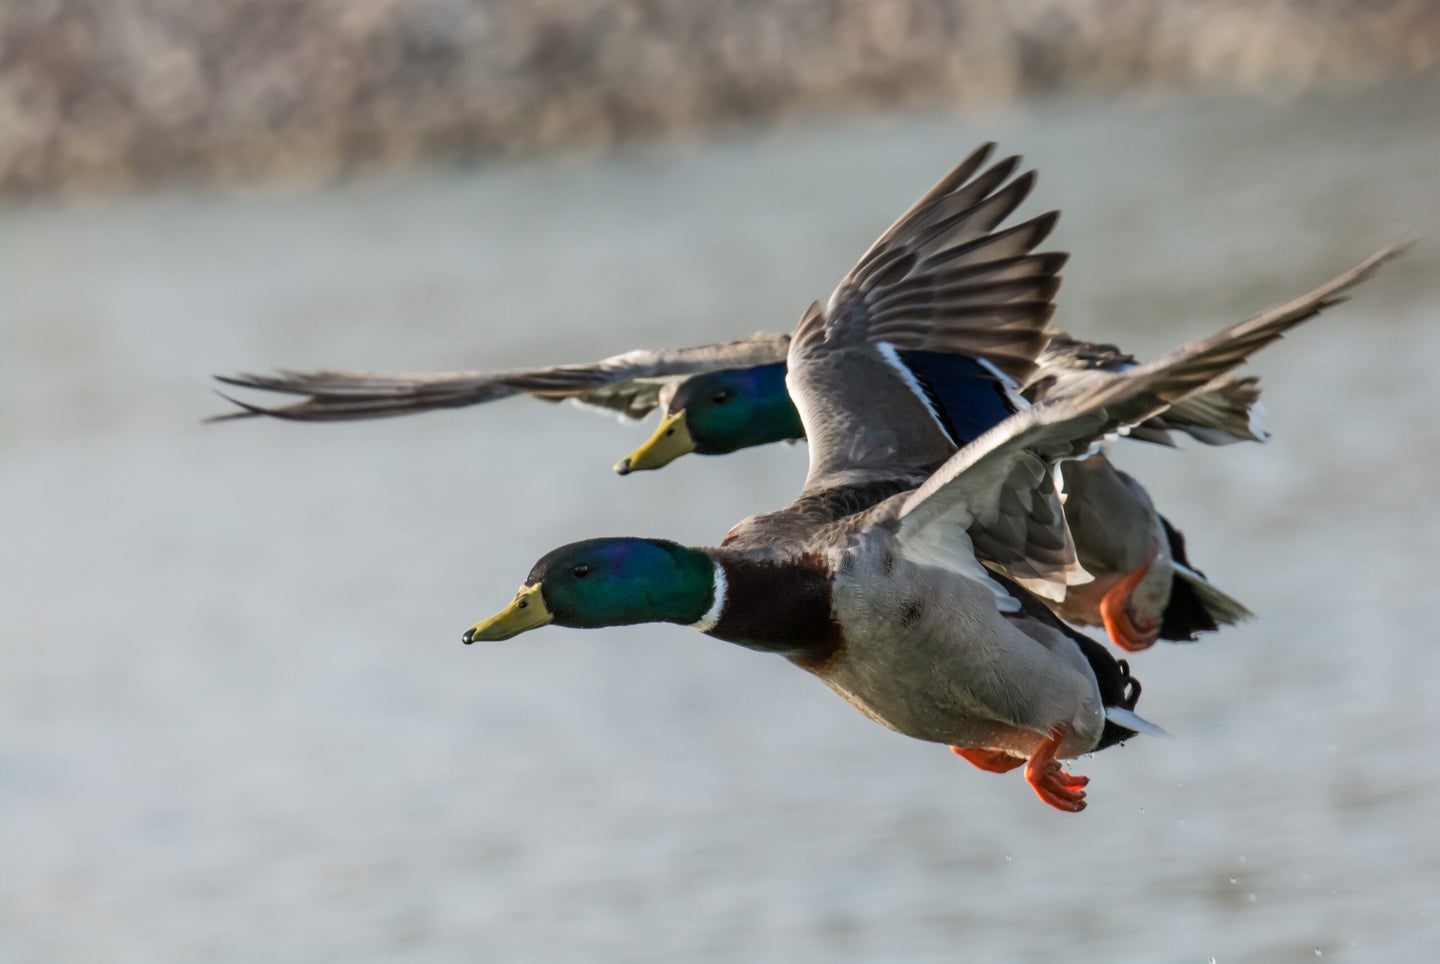 Freshwater waterfowl was the lone bright spot in the new conservation study.